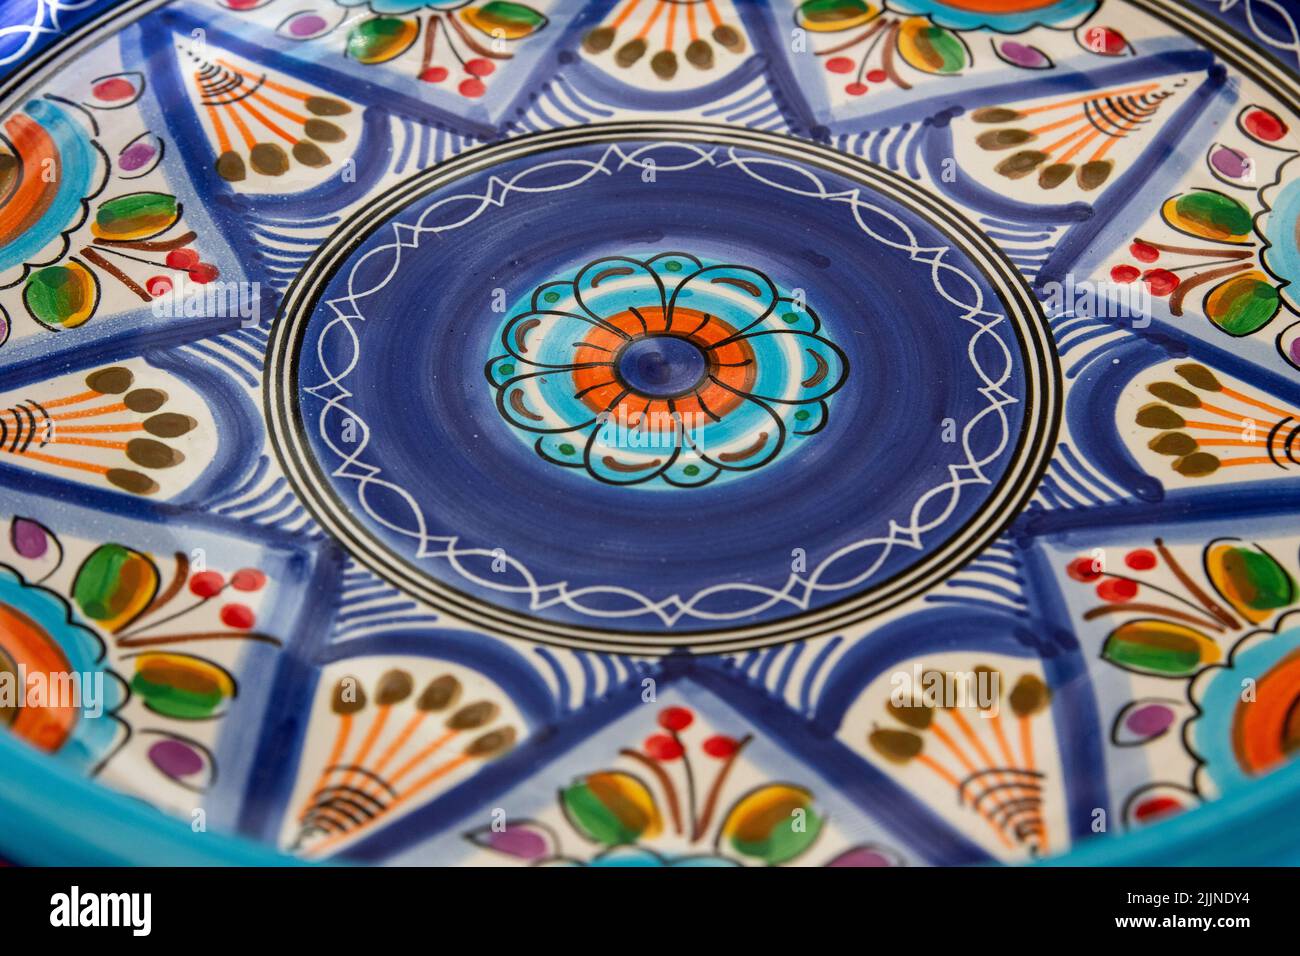 Decoration of typical dishes of Toledo ceramics. Spain Stock Photo